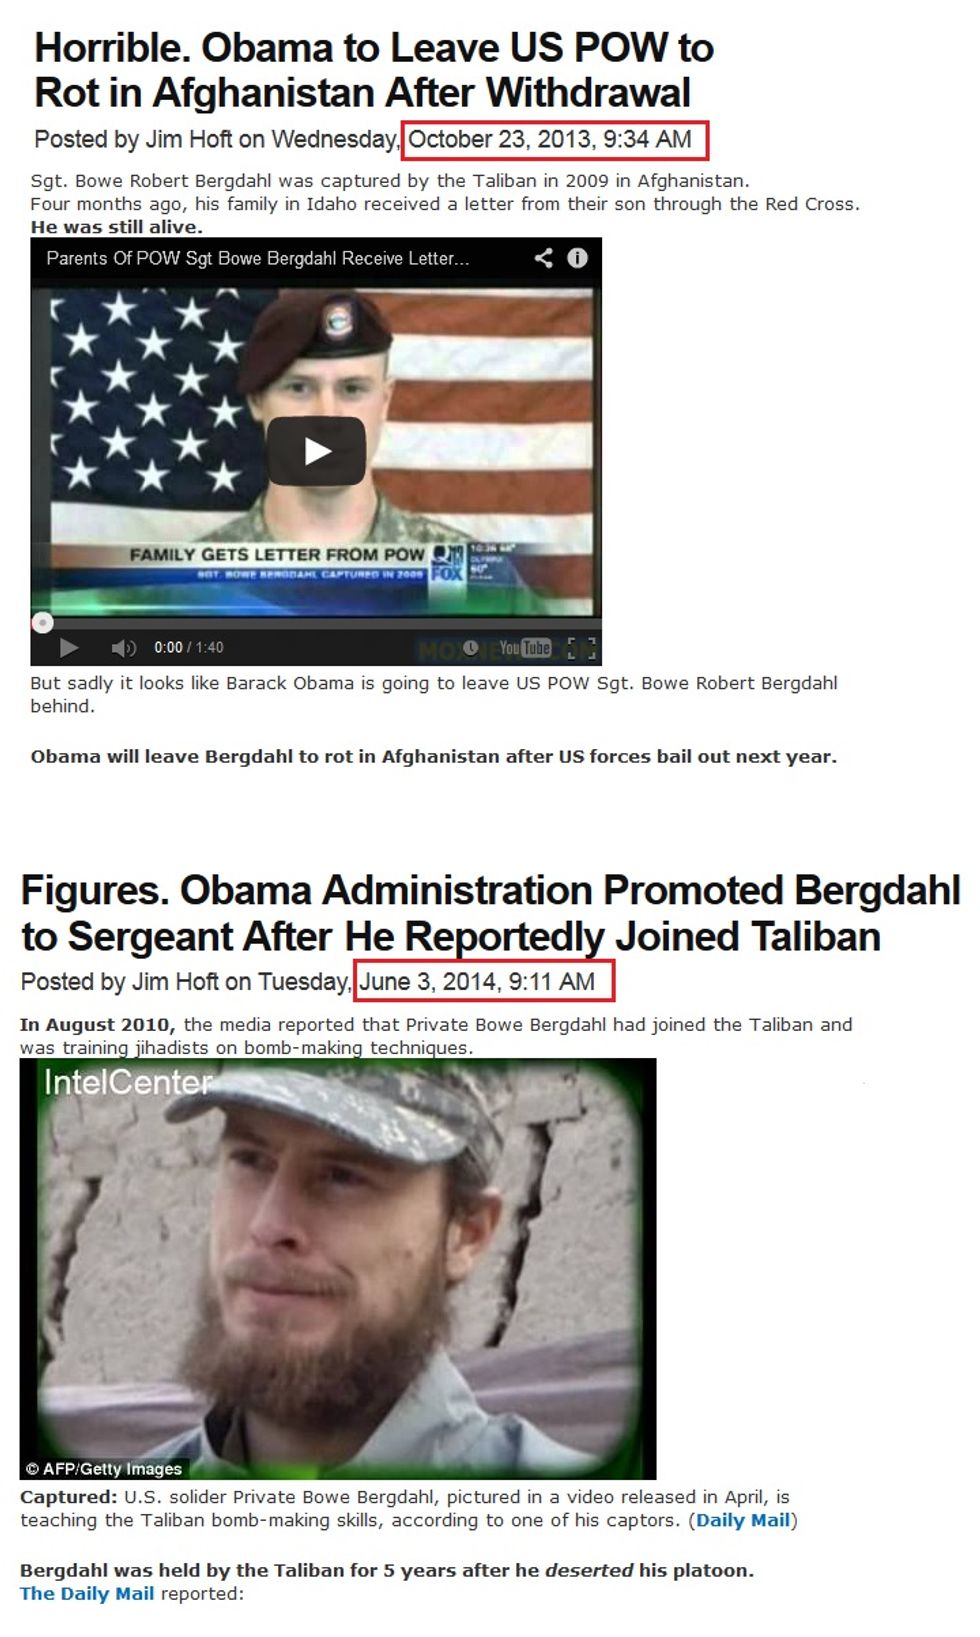 Figures: Stupidest Man On Internet Disgusted That Obama Would Abandon Bergdahl, Rescue Bergdahl